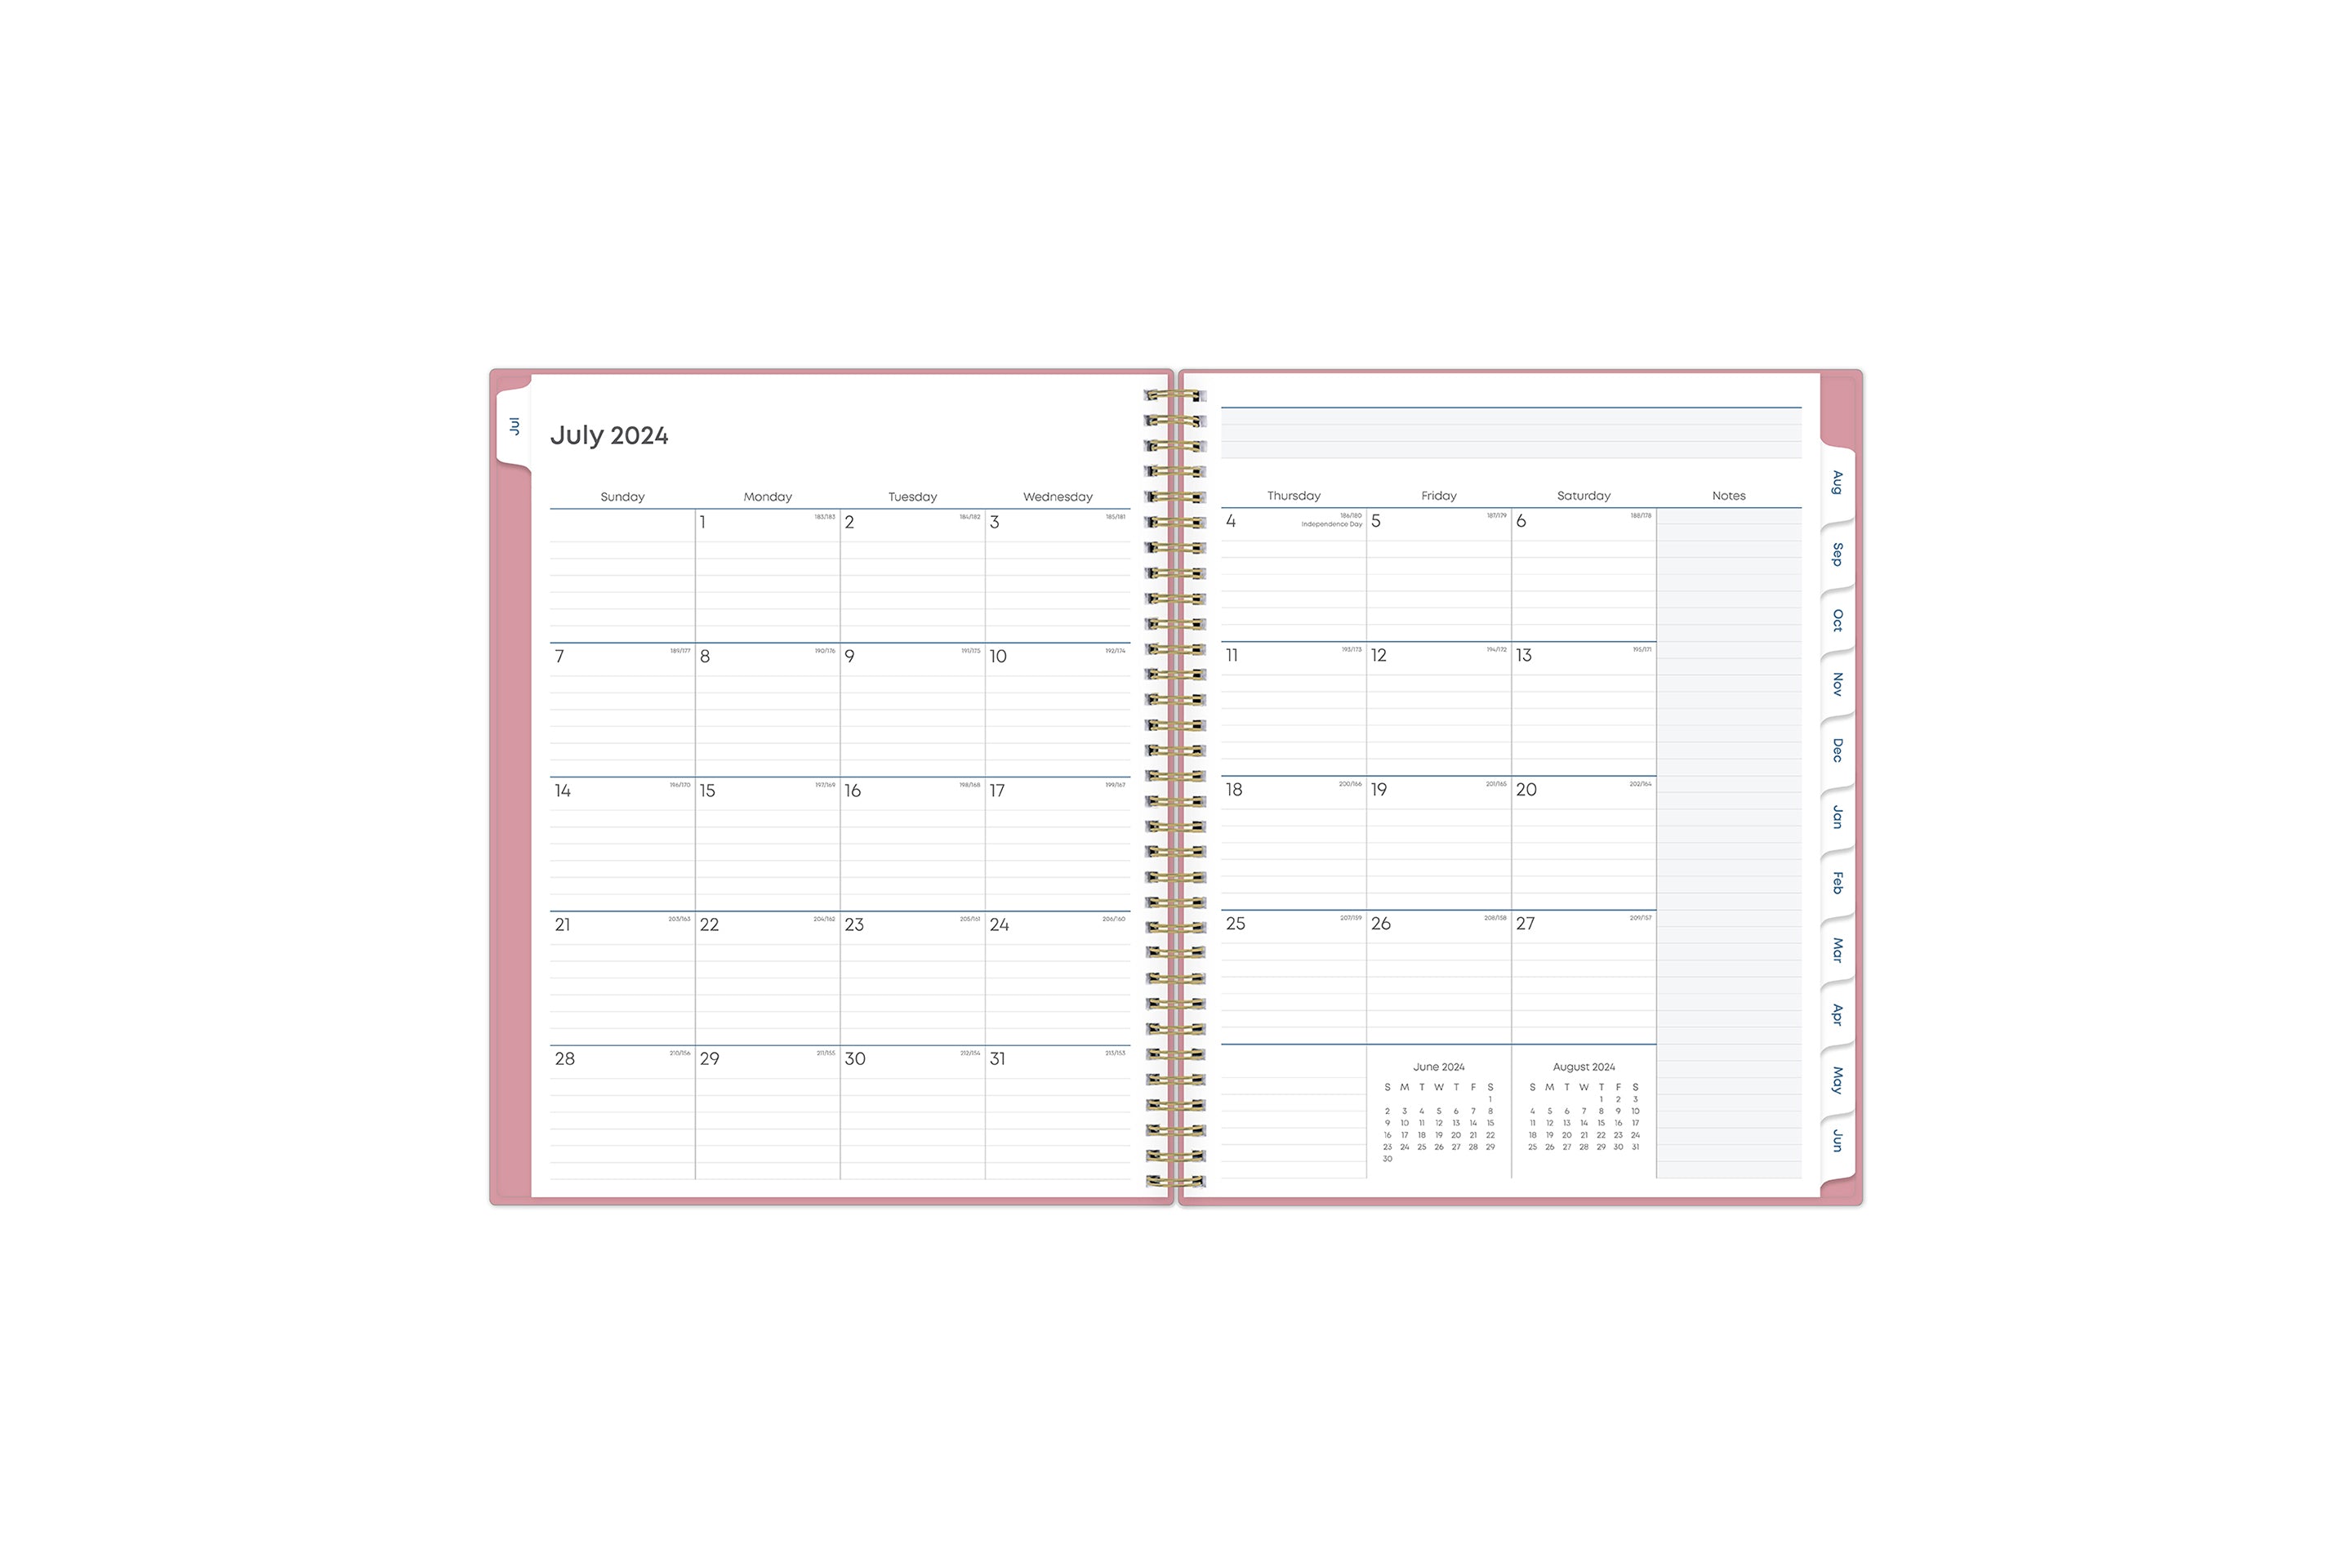  teacher lesson planner monthly view featuring clean writing space for projects, field trips, goals, deadlines, notes section, reference calendars and pink monthly tabs in 8.5x11 size